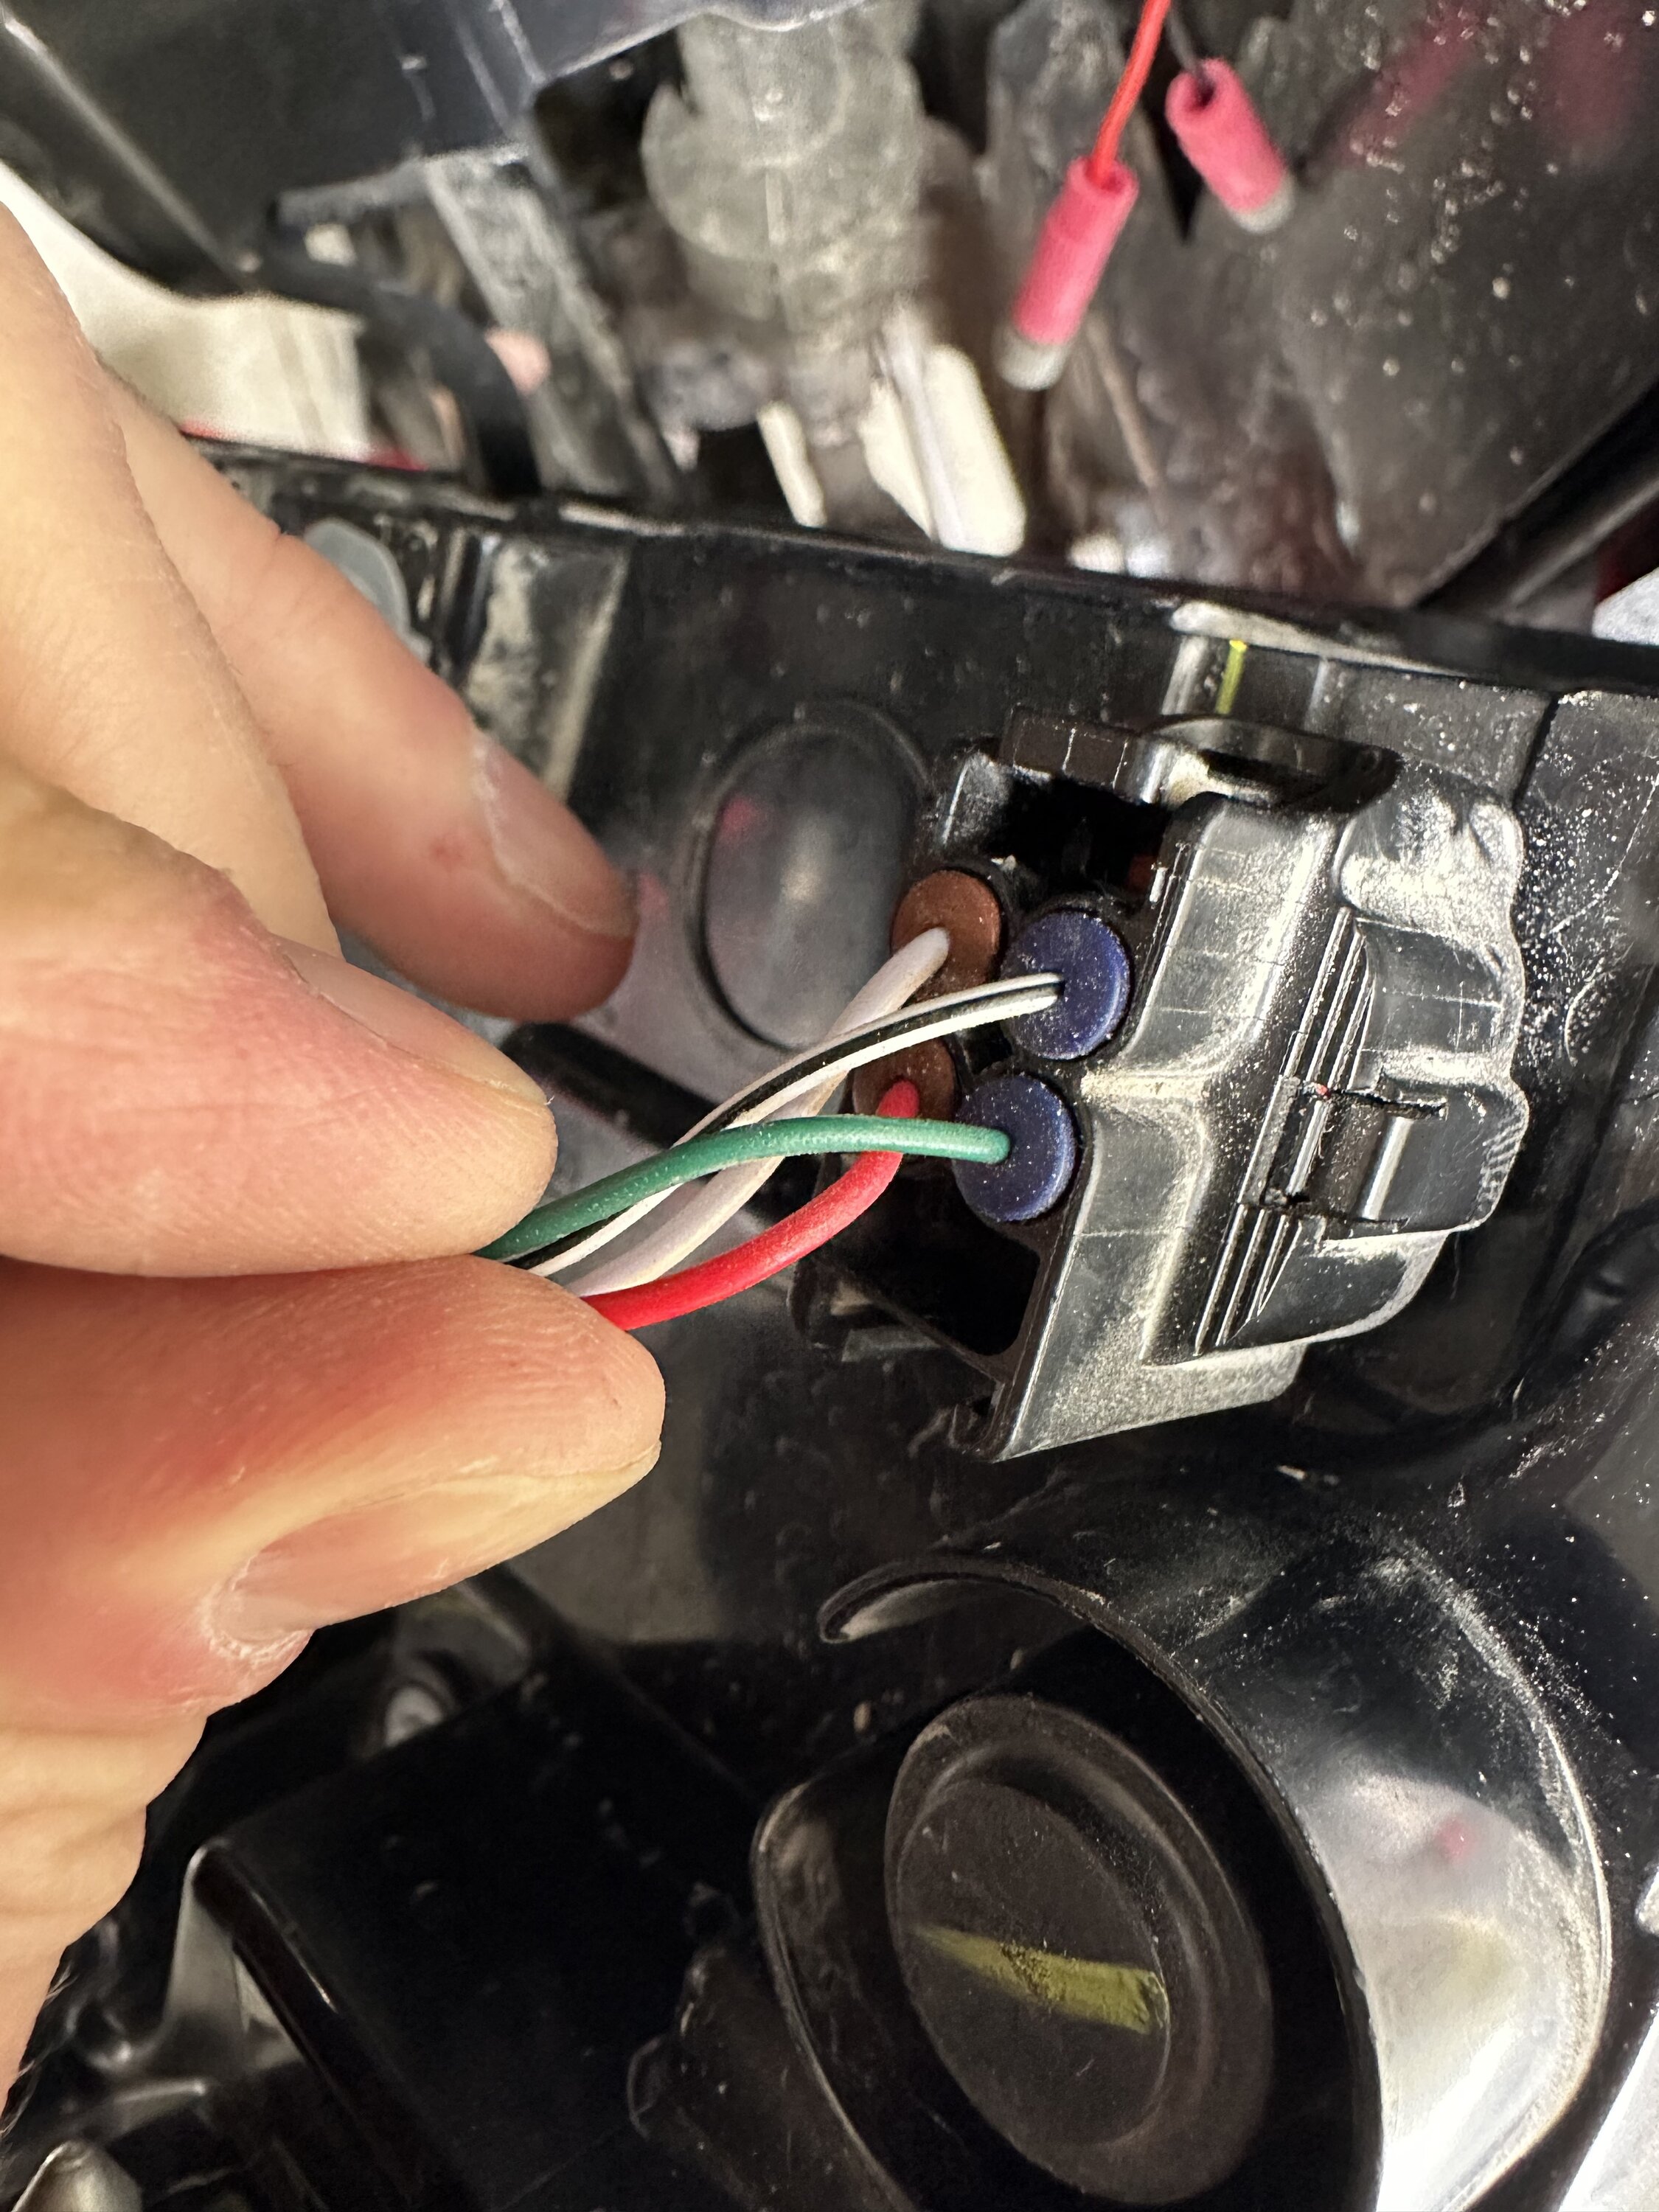 2024 Tacoma Correct wiring for the tailgate lights? 96F52B52-BD4C-43C6-A1A3-96F0A7C13A1C